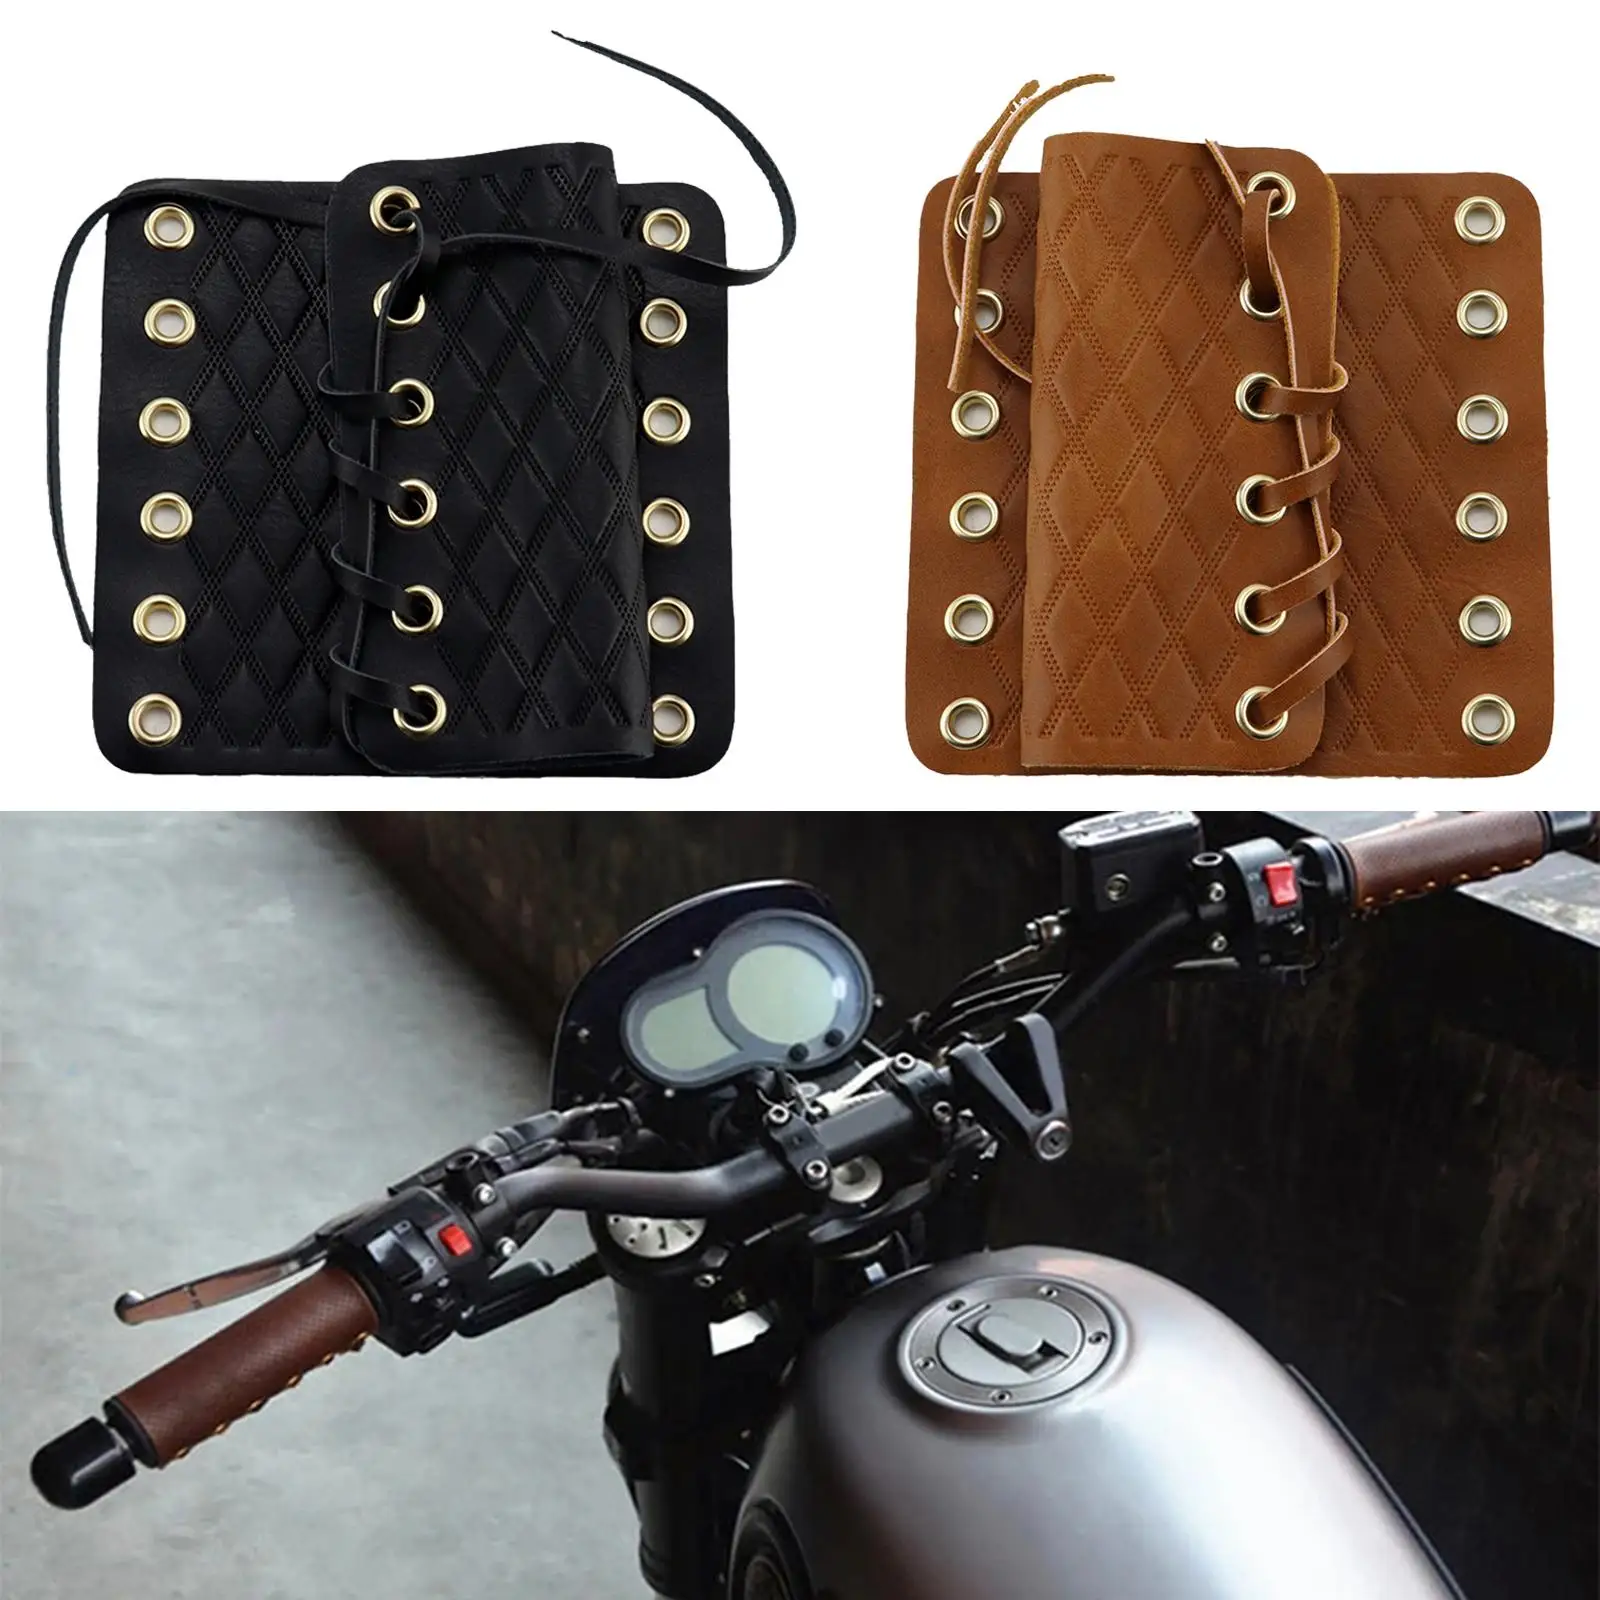 Universal Motorcycle Hand Grips Cover for Most Motorbikes All Handgrips